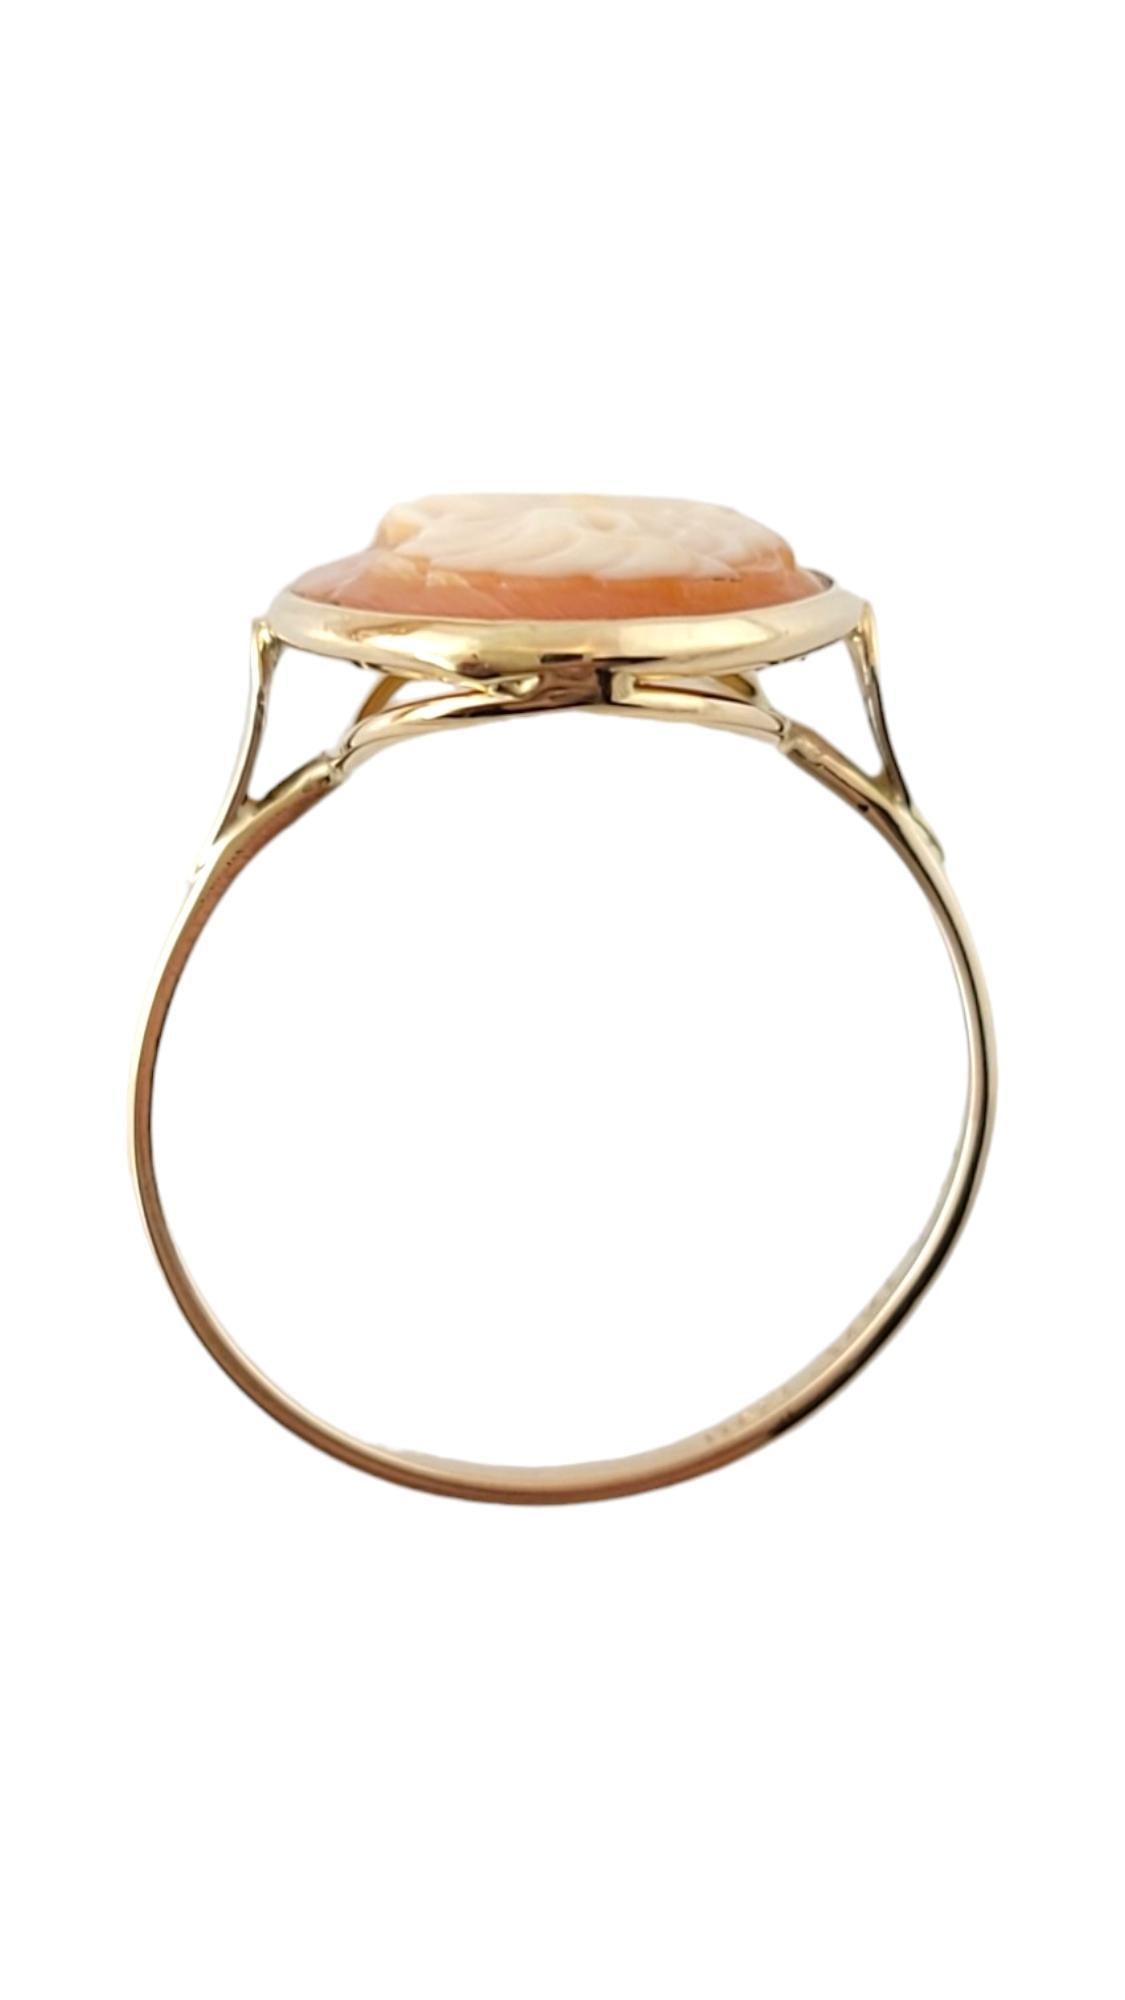 Vintage 14K Yellow Gold Cameo Ring Size 7.25 #16931 In Good Condition For Sale In Washington Depot, CT